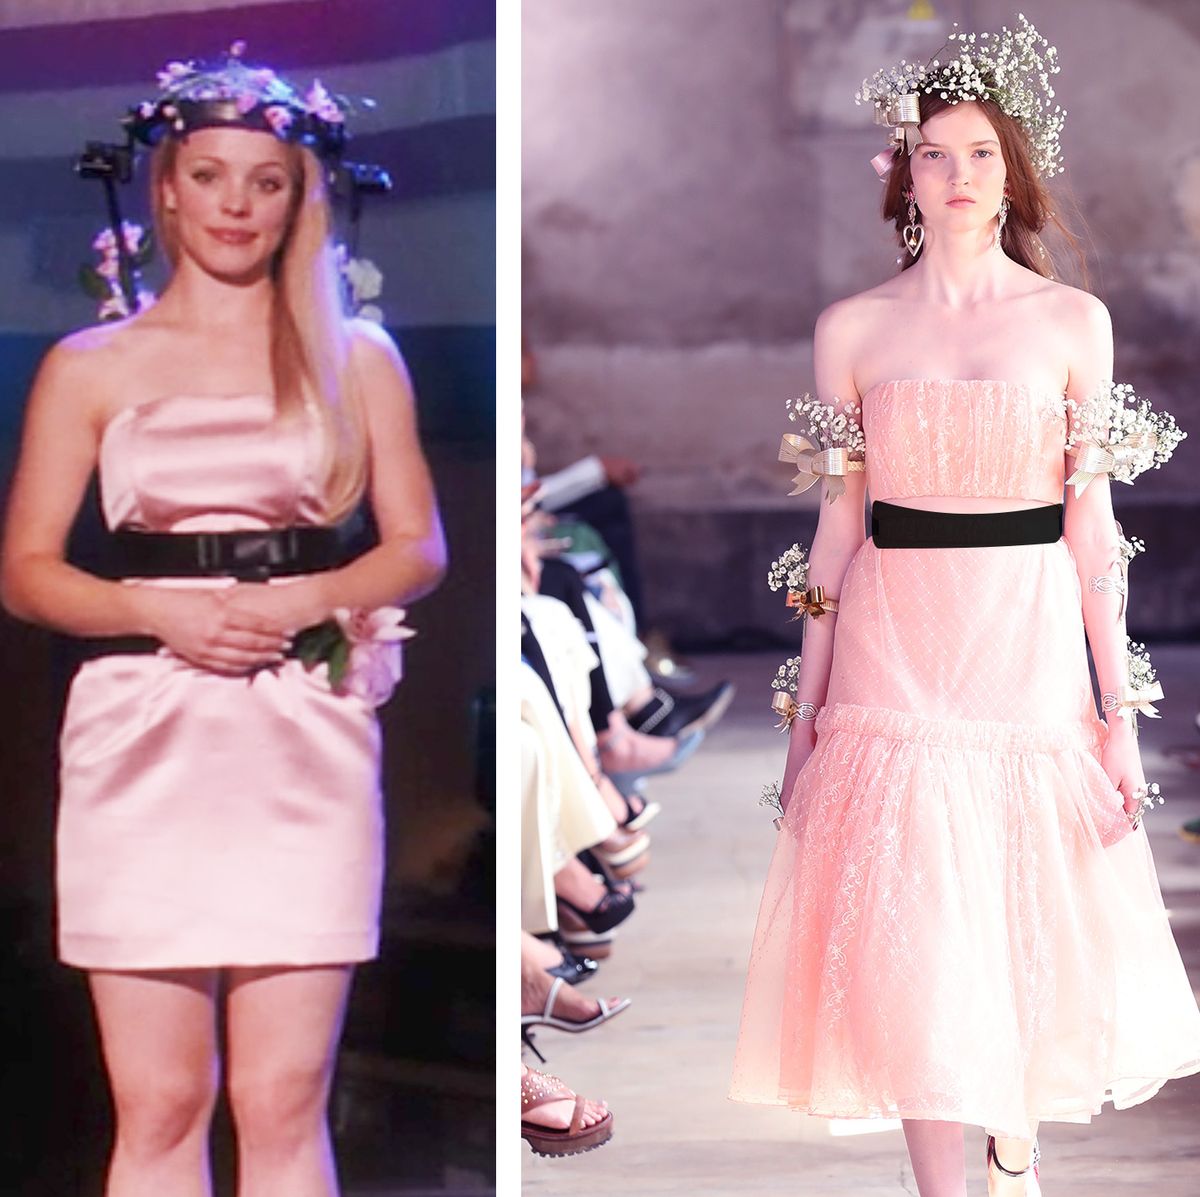 12 Times Mean Girls Was a Runway Inspiration